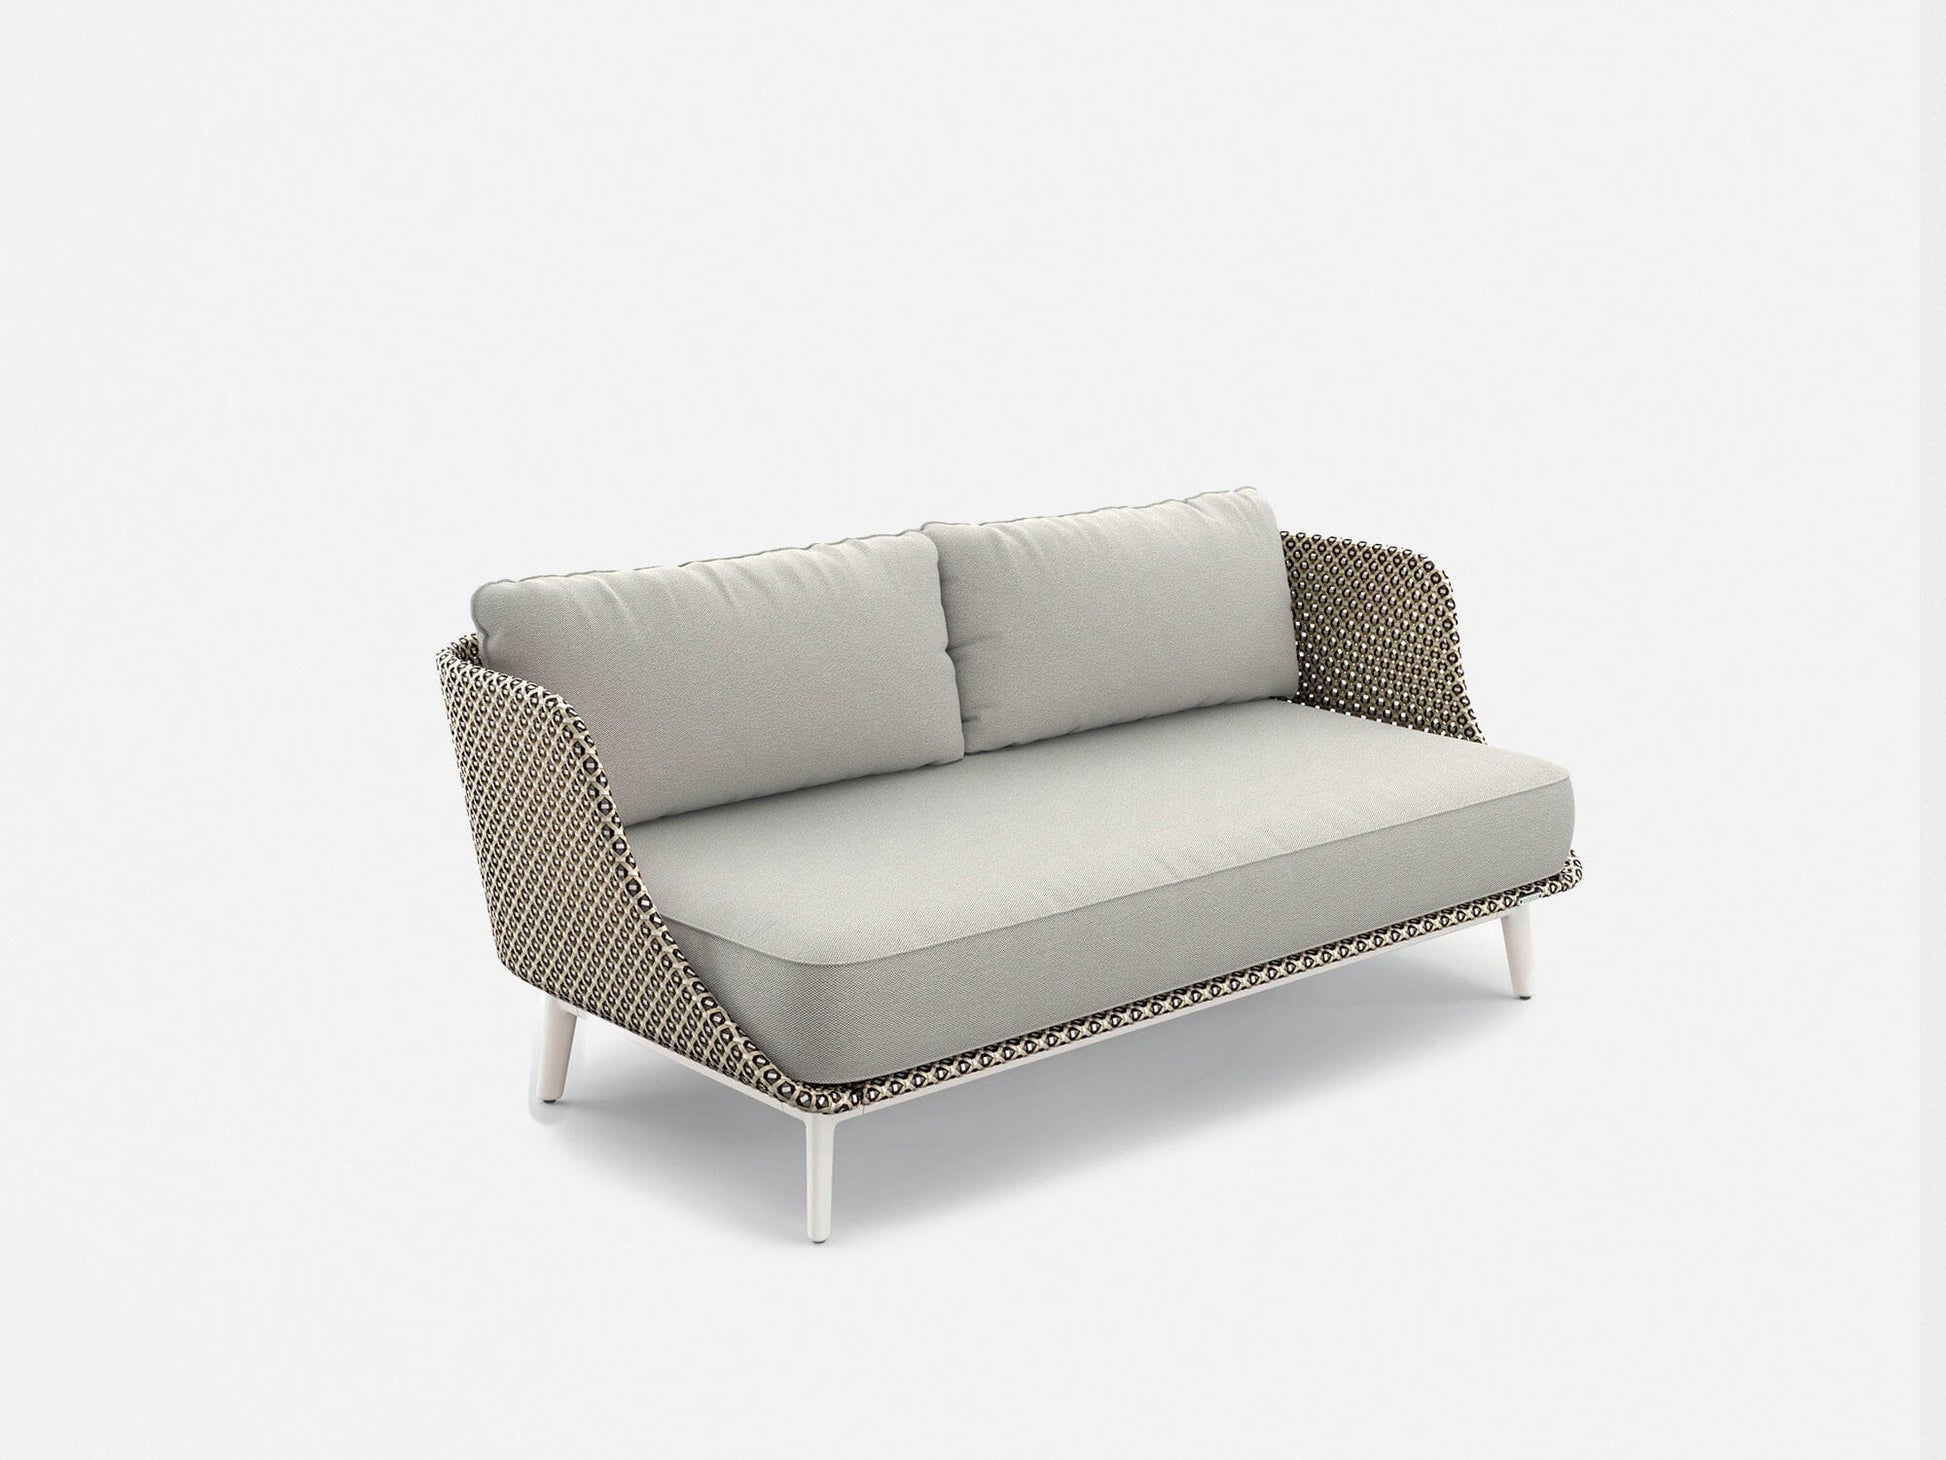 MBARQ 3-Seater Sofa 15% Off Outdoor Furniture DEDON 